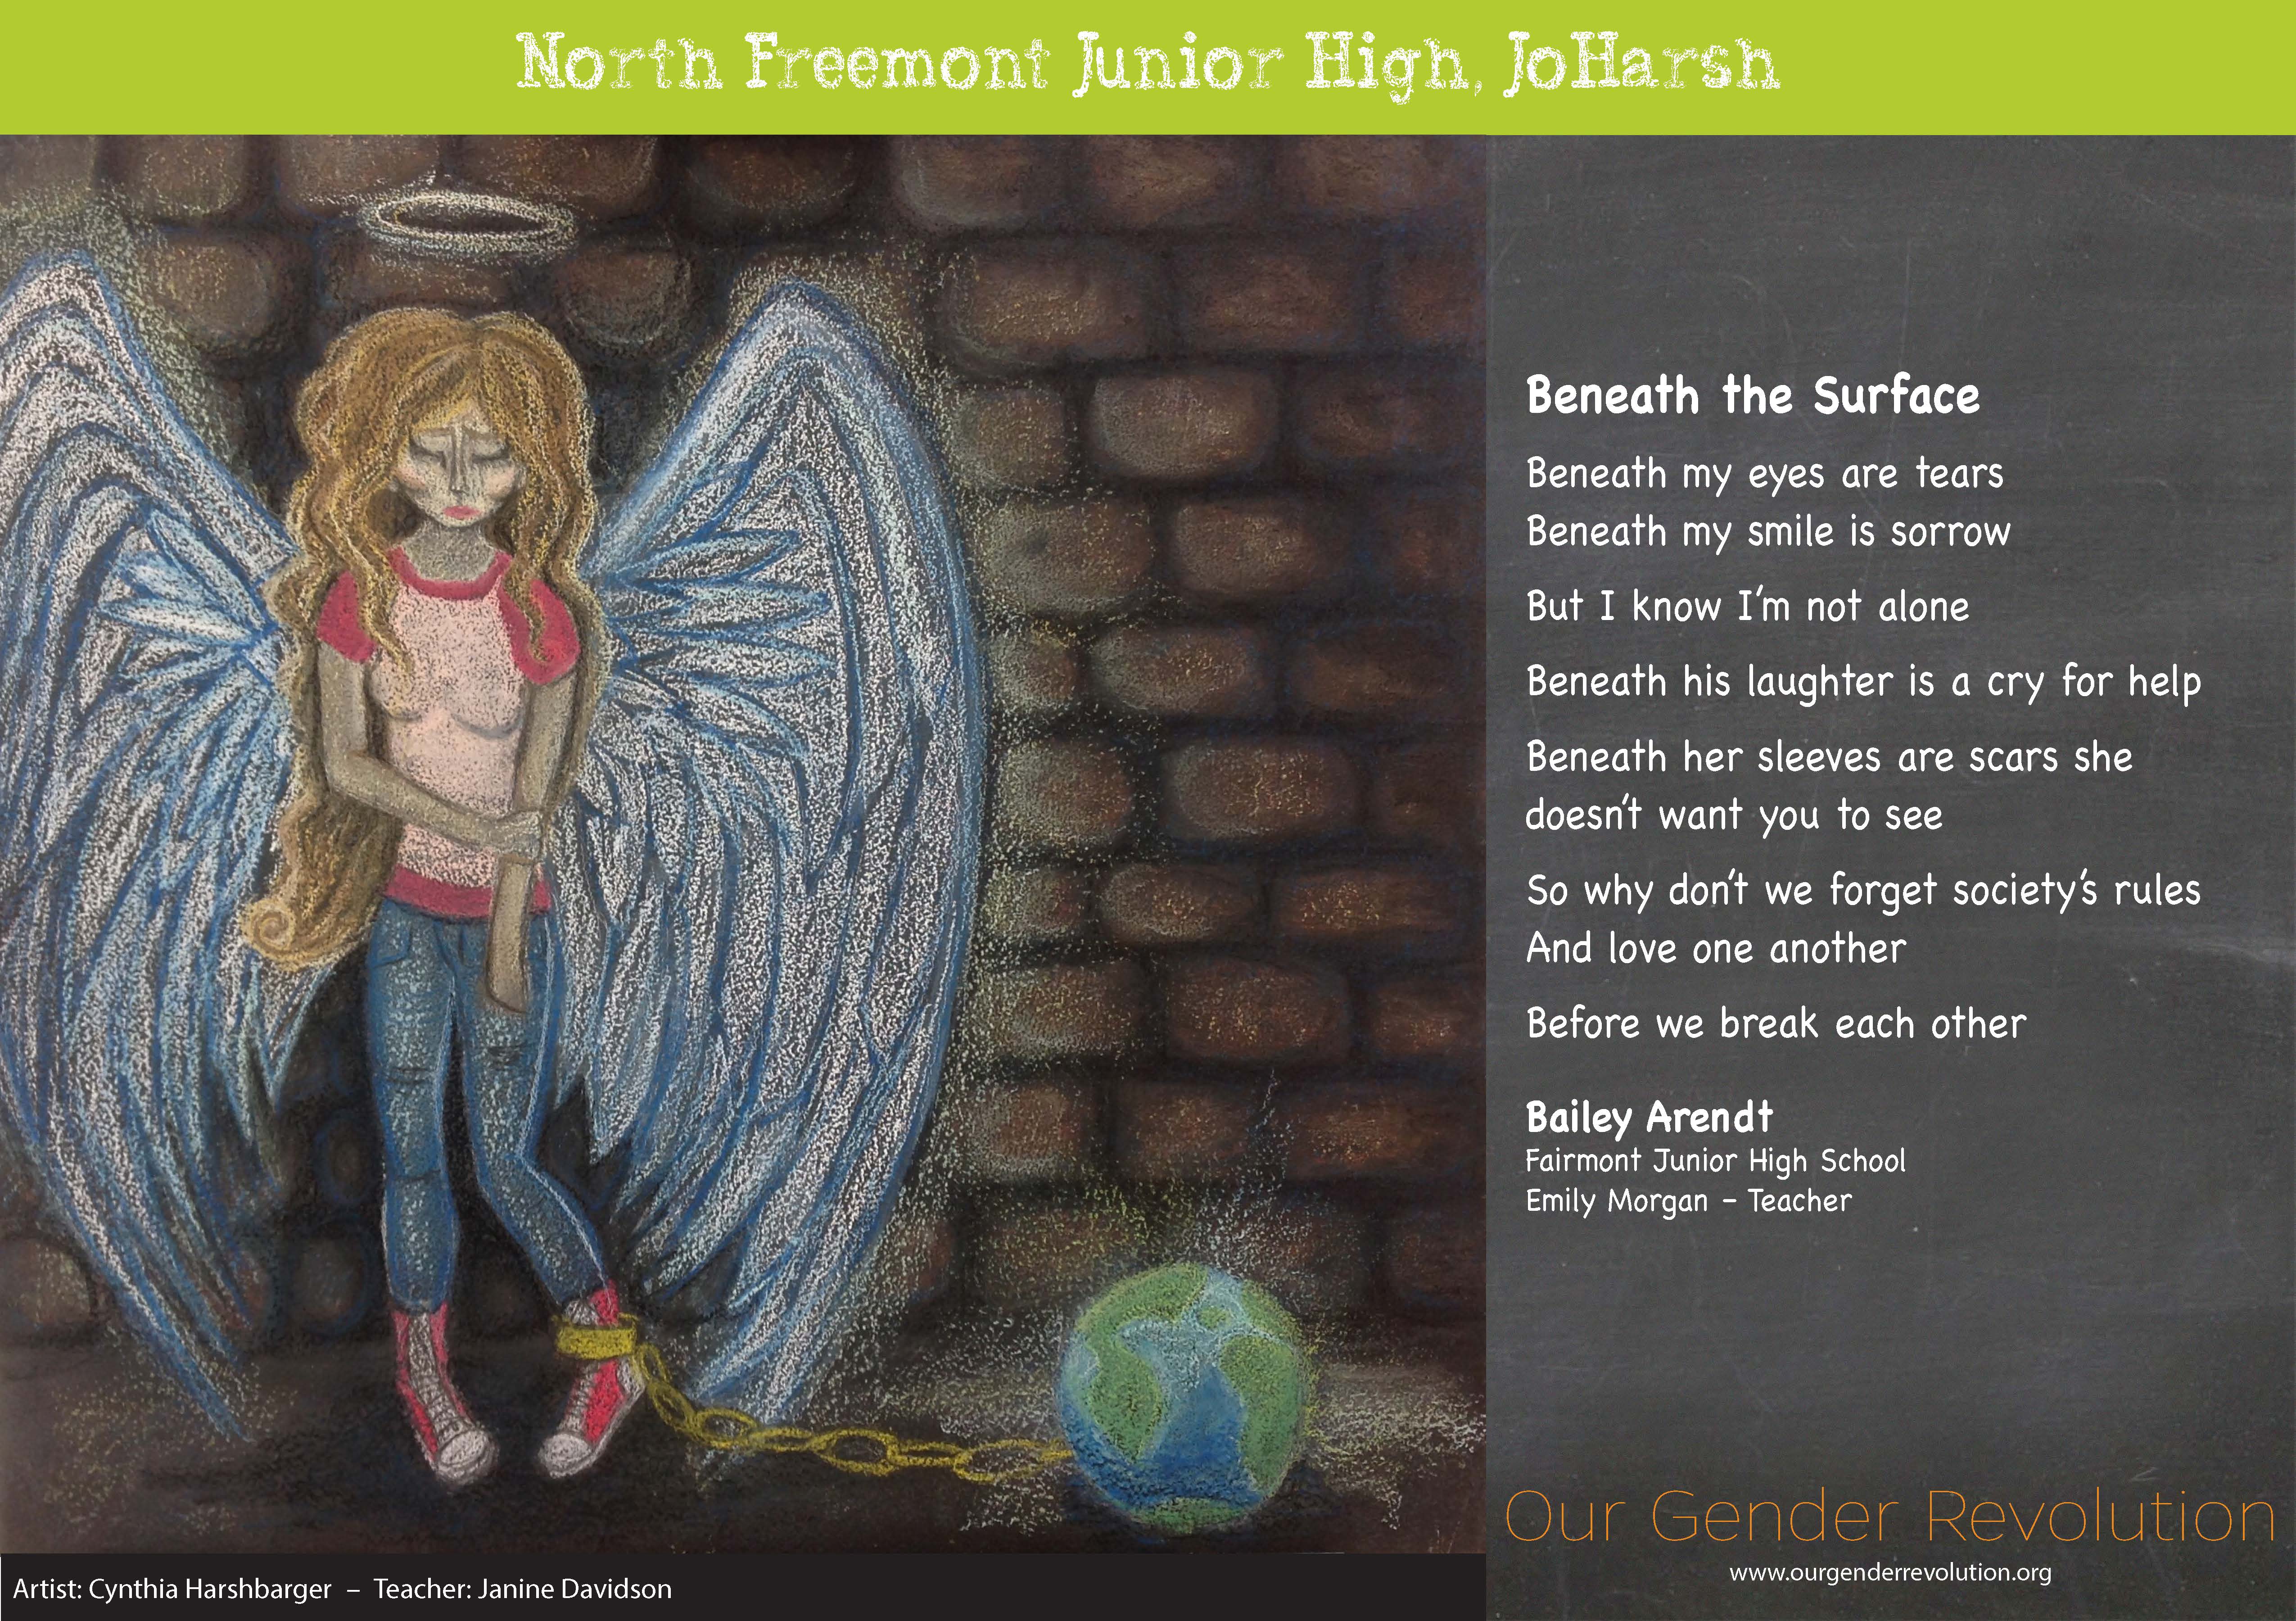 North Freemont Junior High - Beneath the Surface by Bailey Arendt